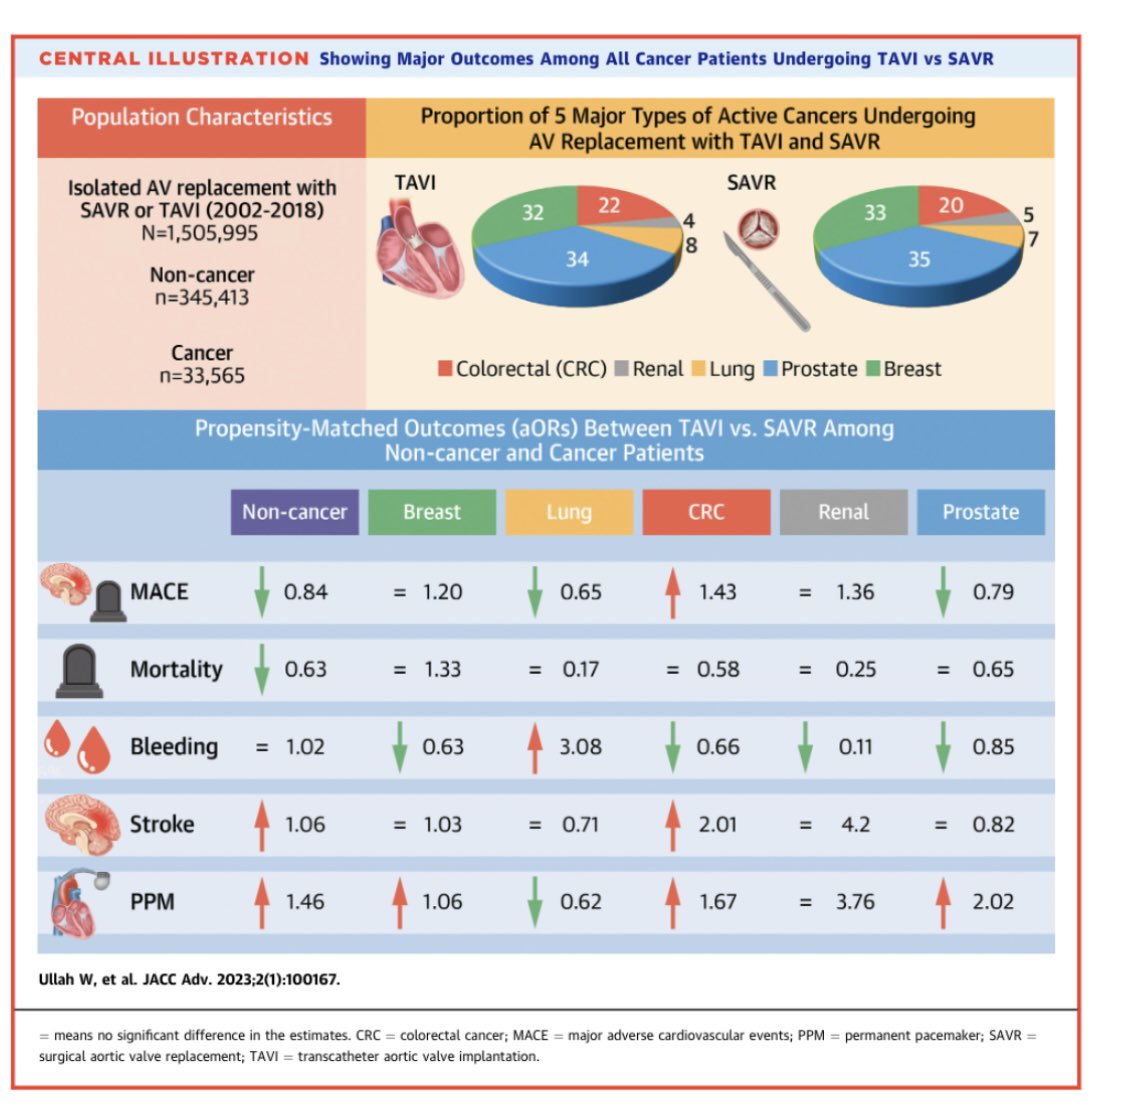 Our 📝 in @JACCJournals showing ⬇️ or🟰MACE and mortality in pts undergoing TAVI compared with SAVR in most solid cancers except colorectal. @fischman_david @DocSavageTJU @chadialraies @DrNickTJU @AVishnevsky_MD @mmamas1973 @arnavkumar Link: sciencedirect.com/science/articl…